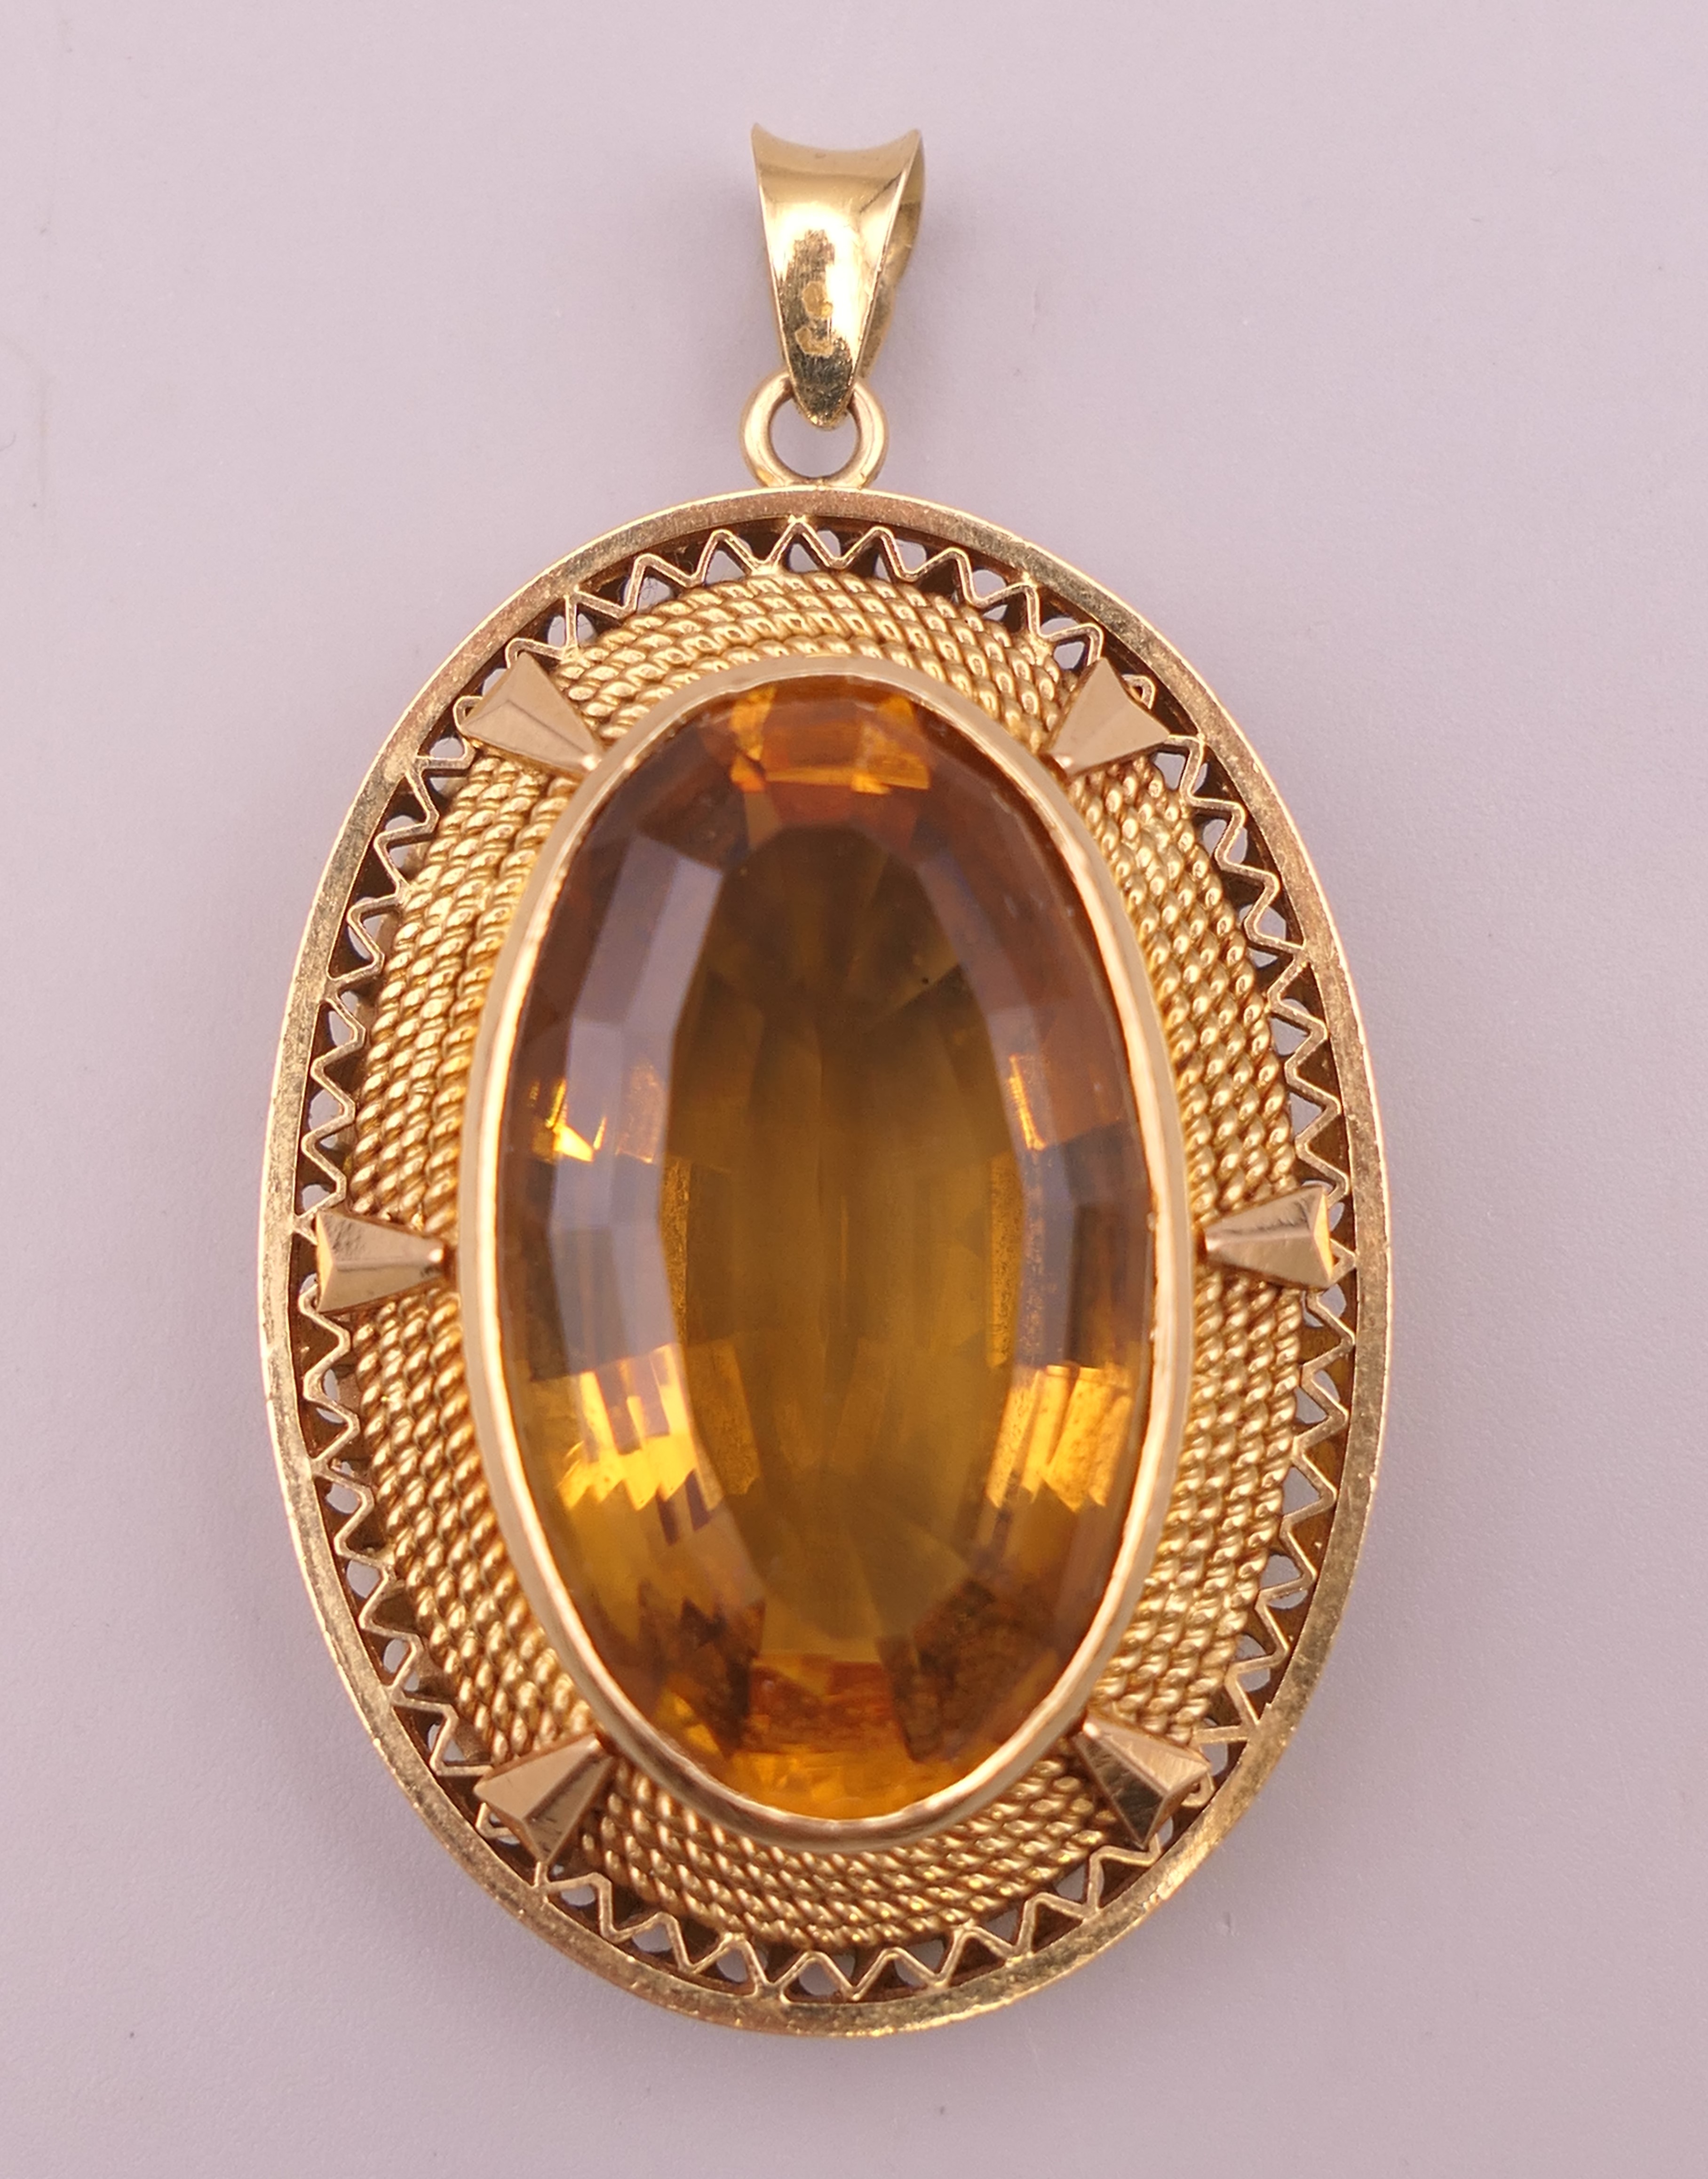 A large unmarked gold citrine pendant (tests as 15 ct plus gold). 5 cm high. 20.